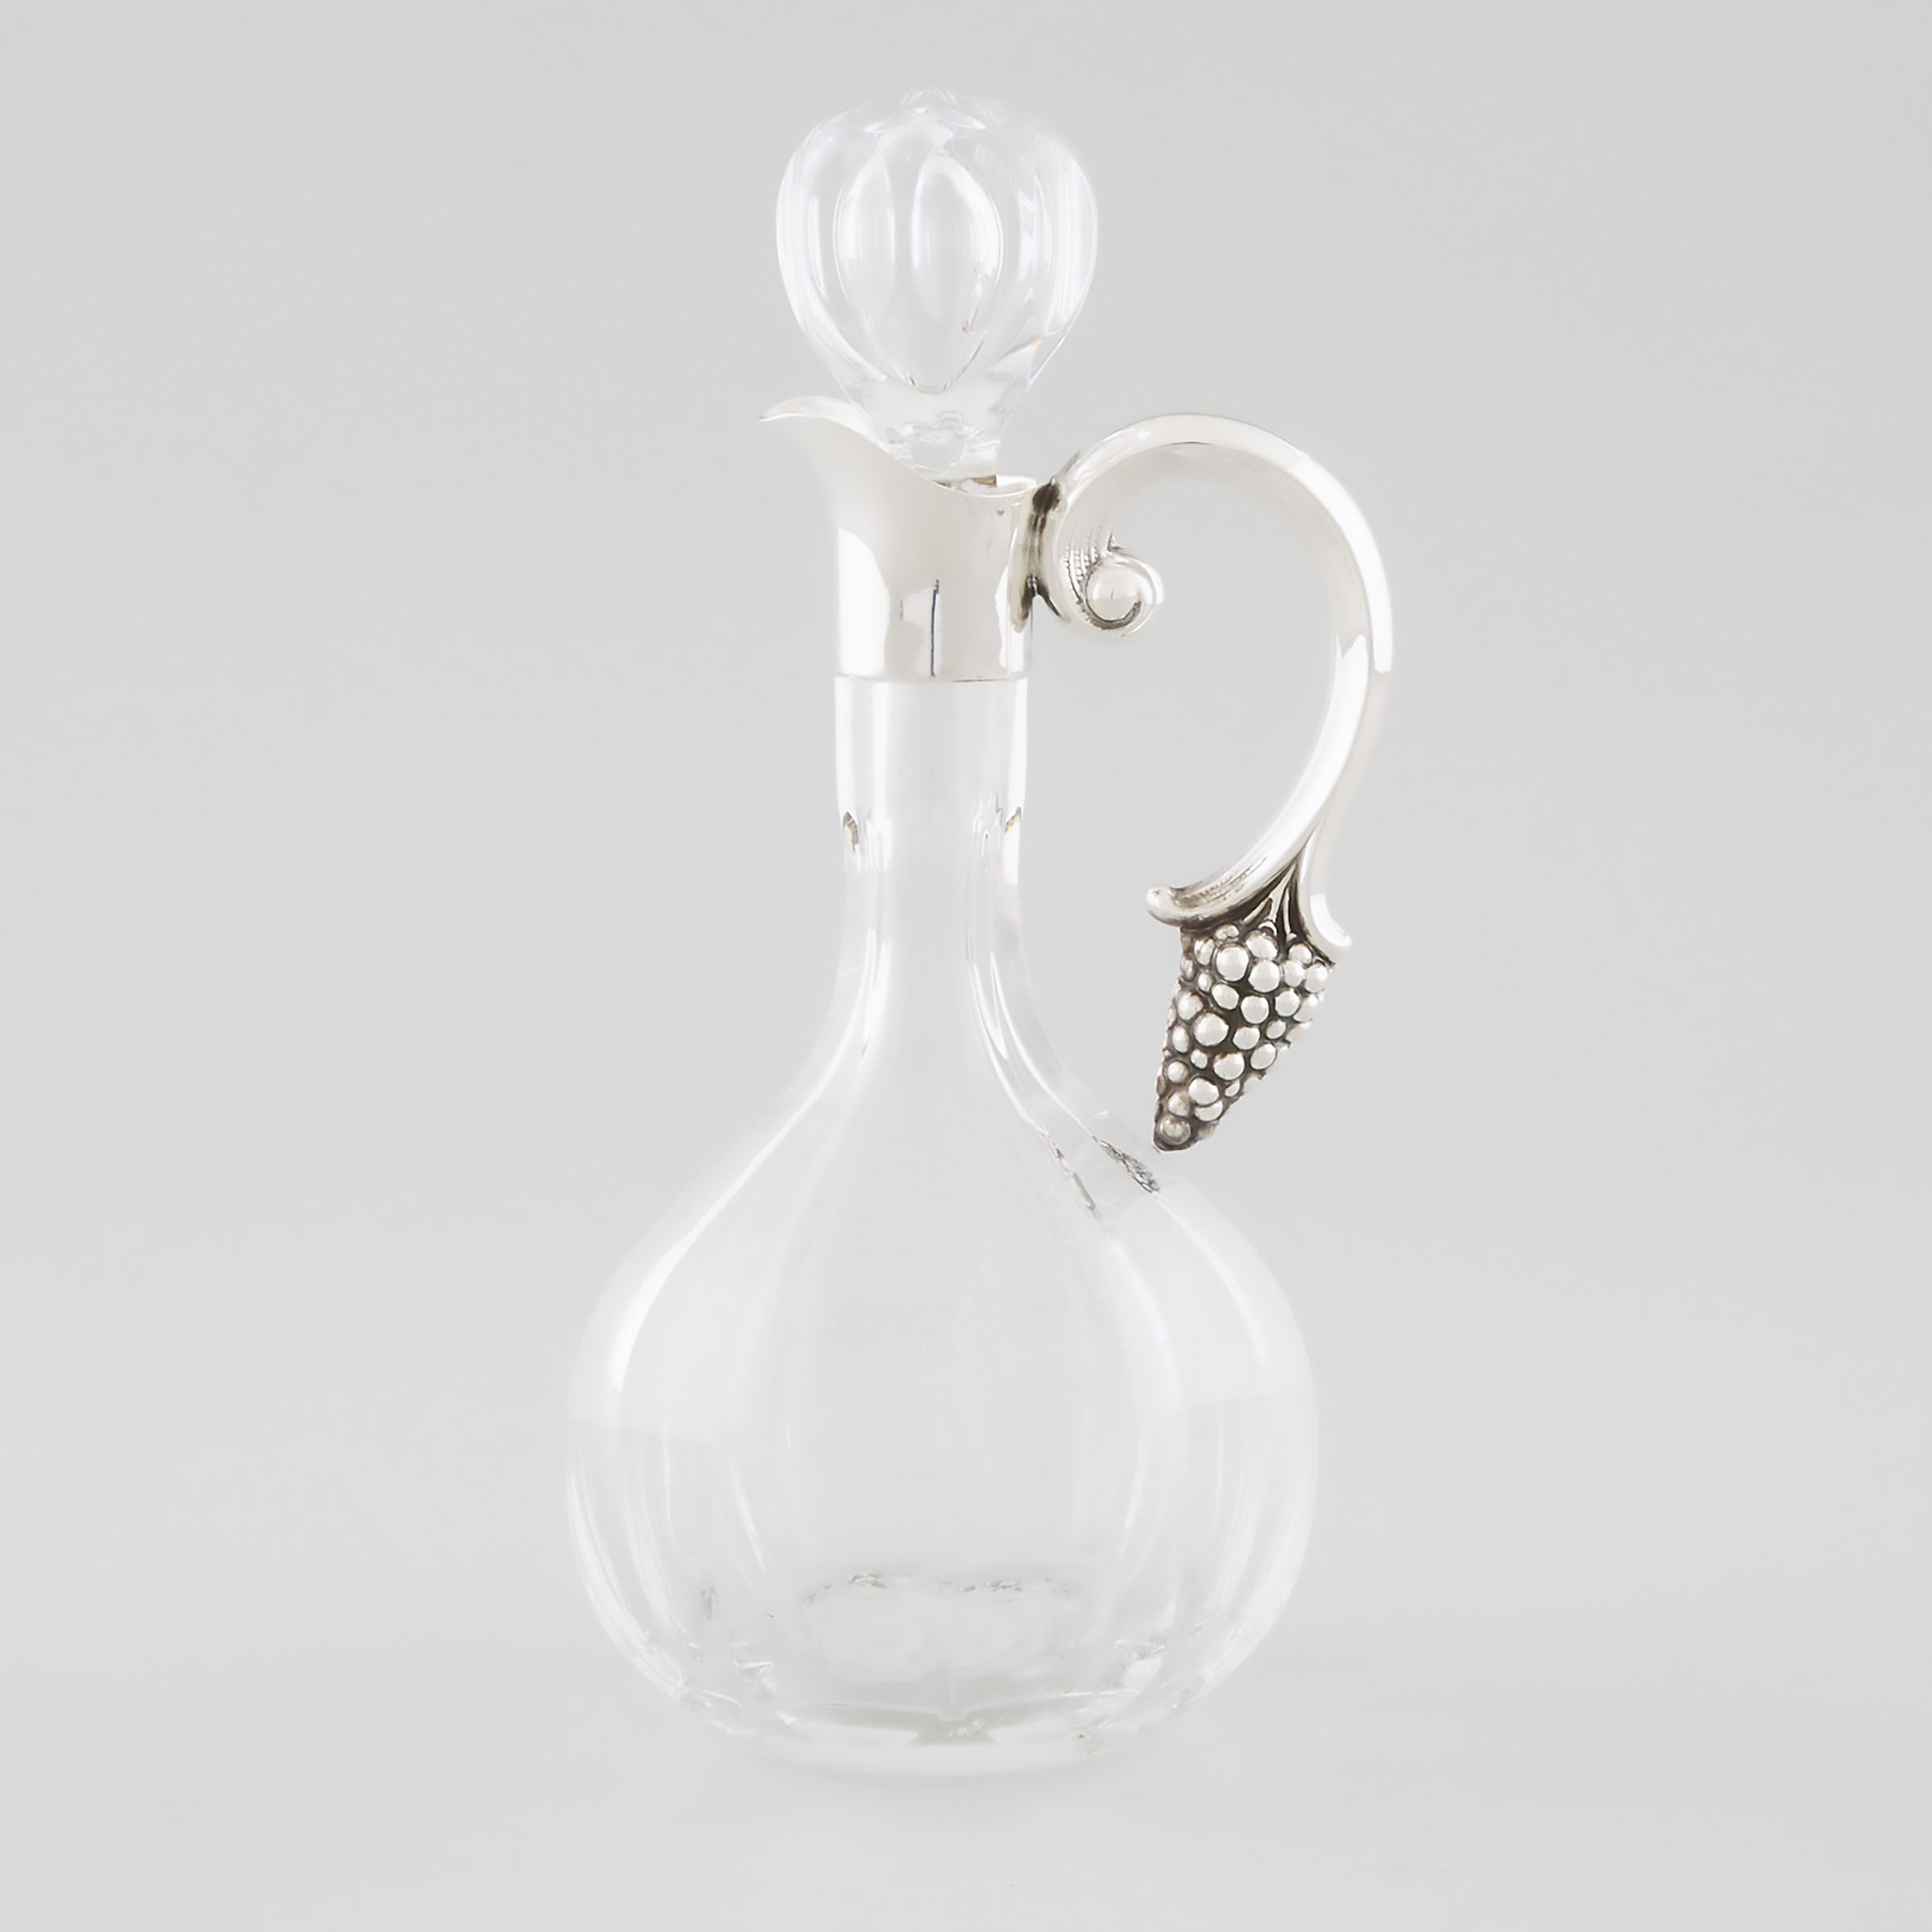 Continental or North American Silver Mounted Cut Glass Carafe, 20th century